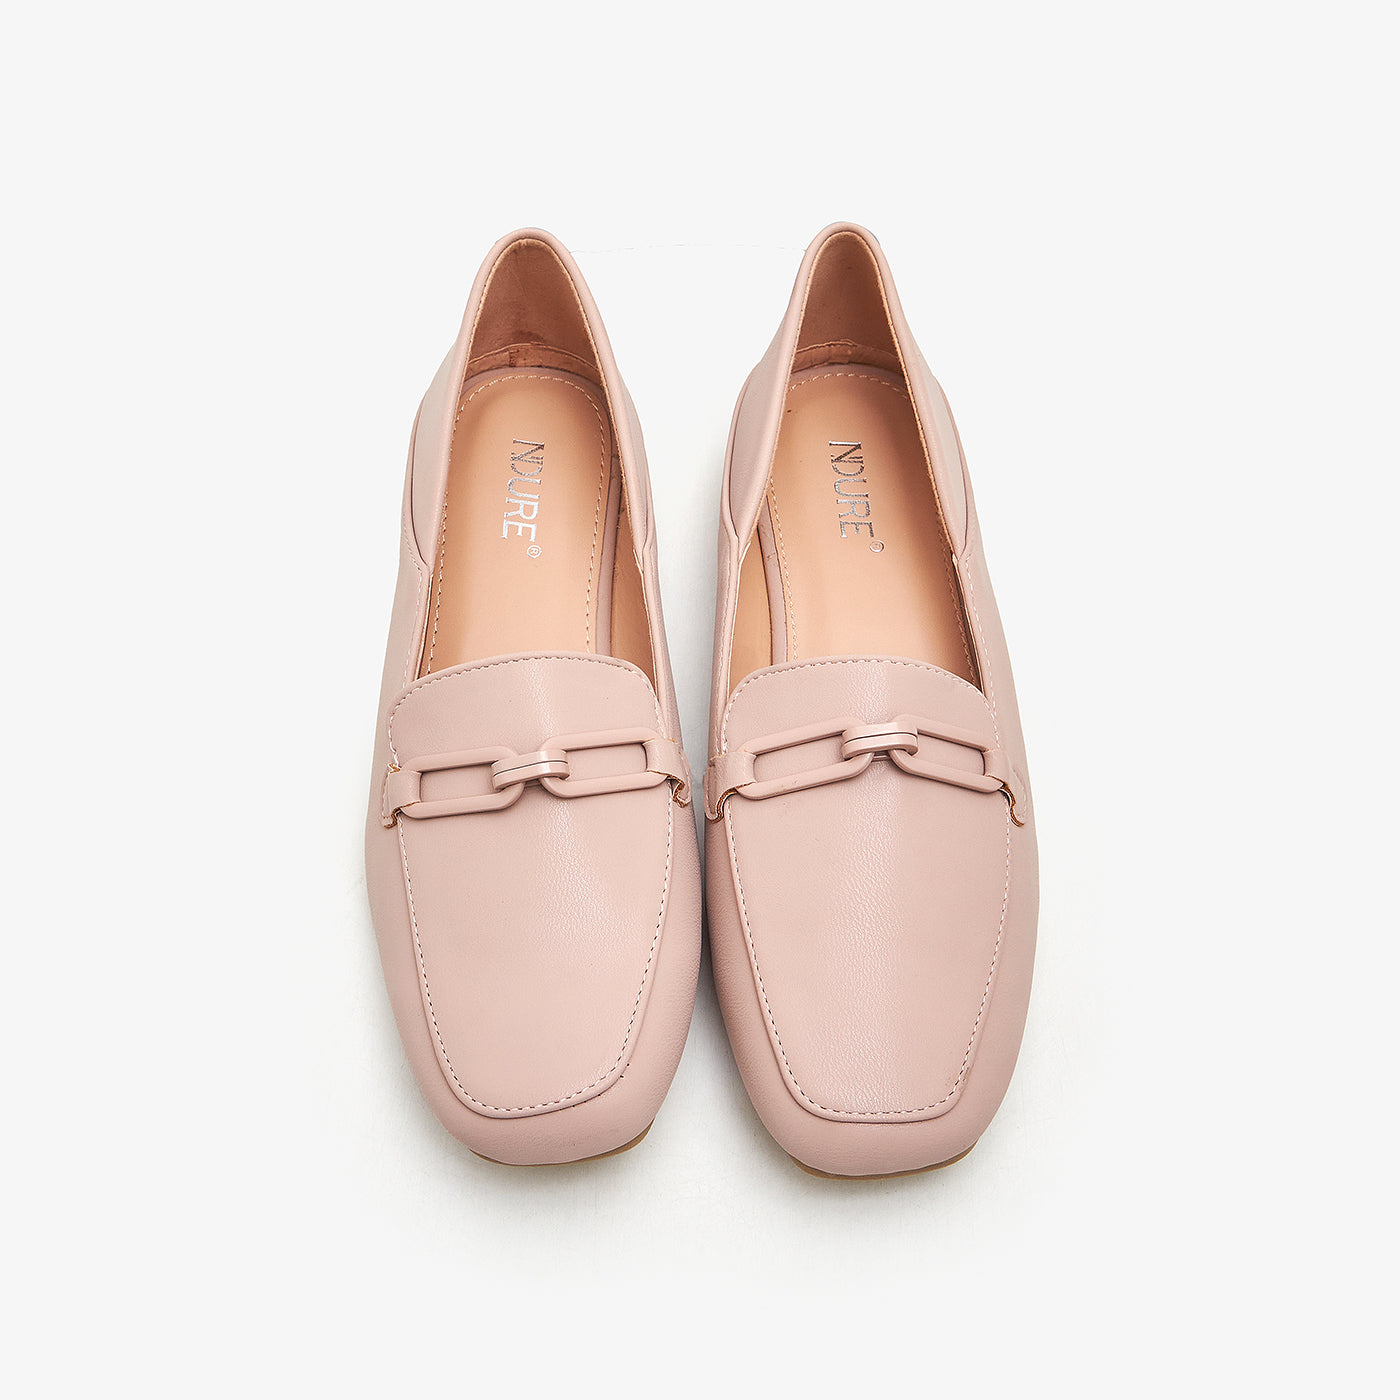 Women's Chic Loafers